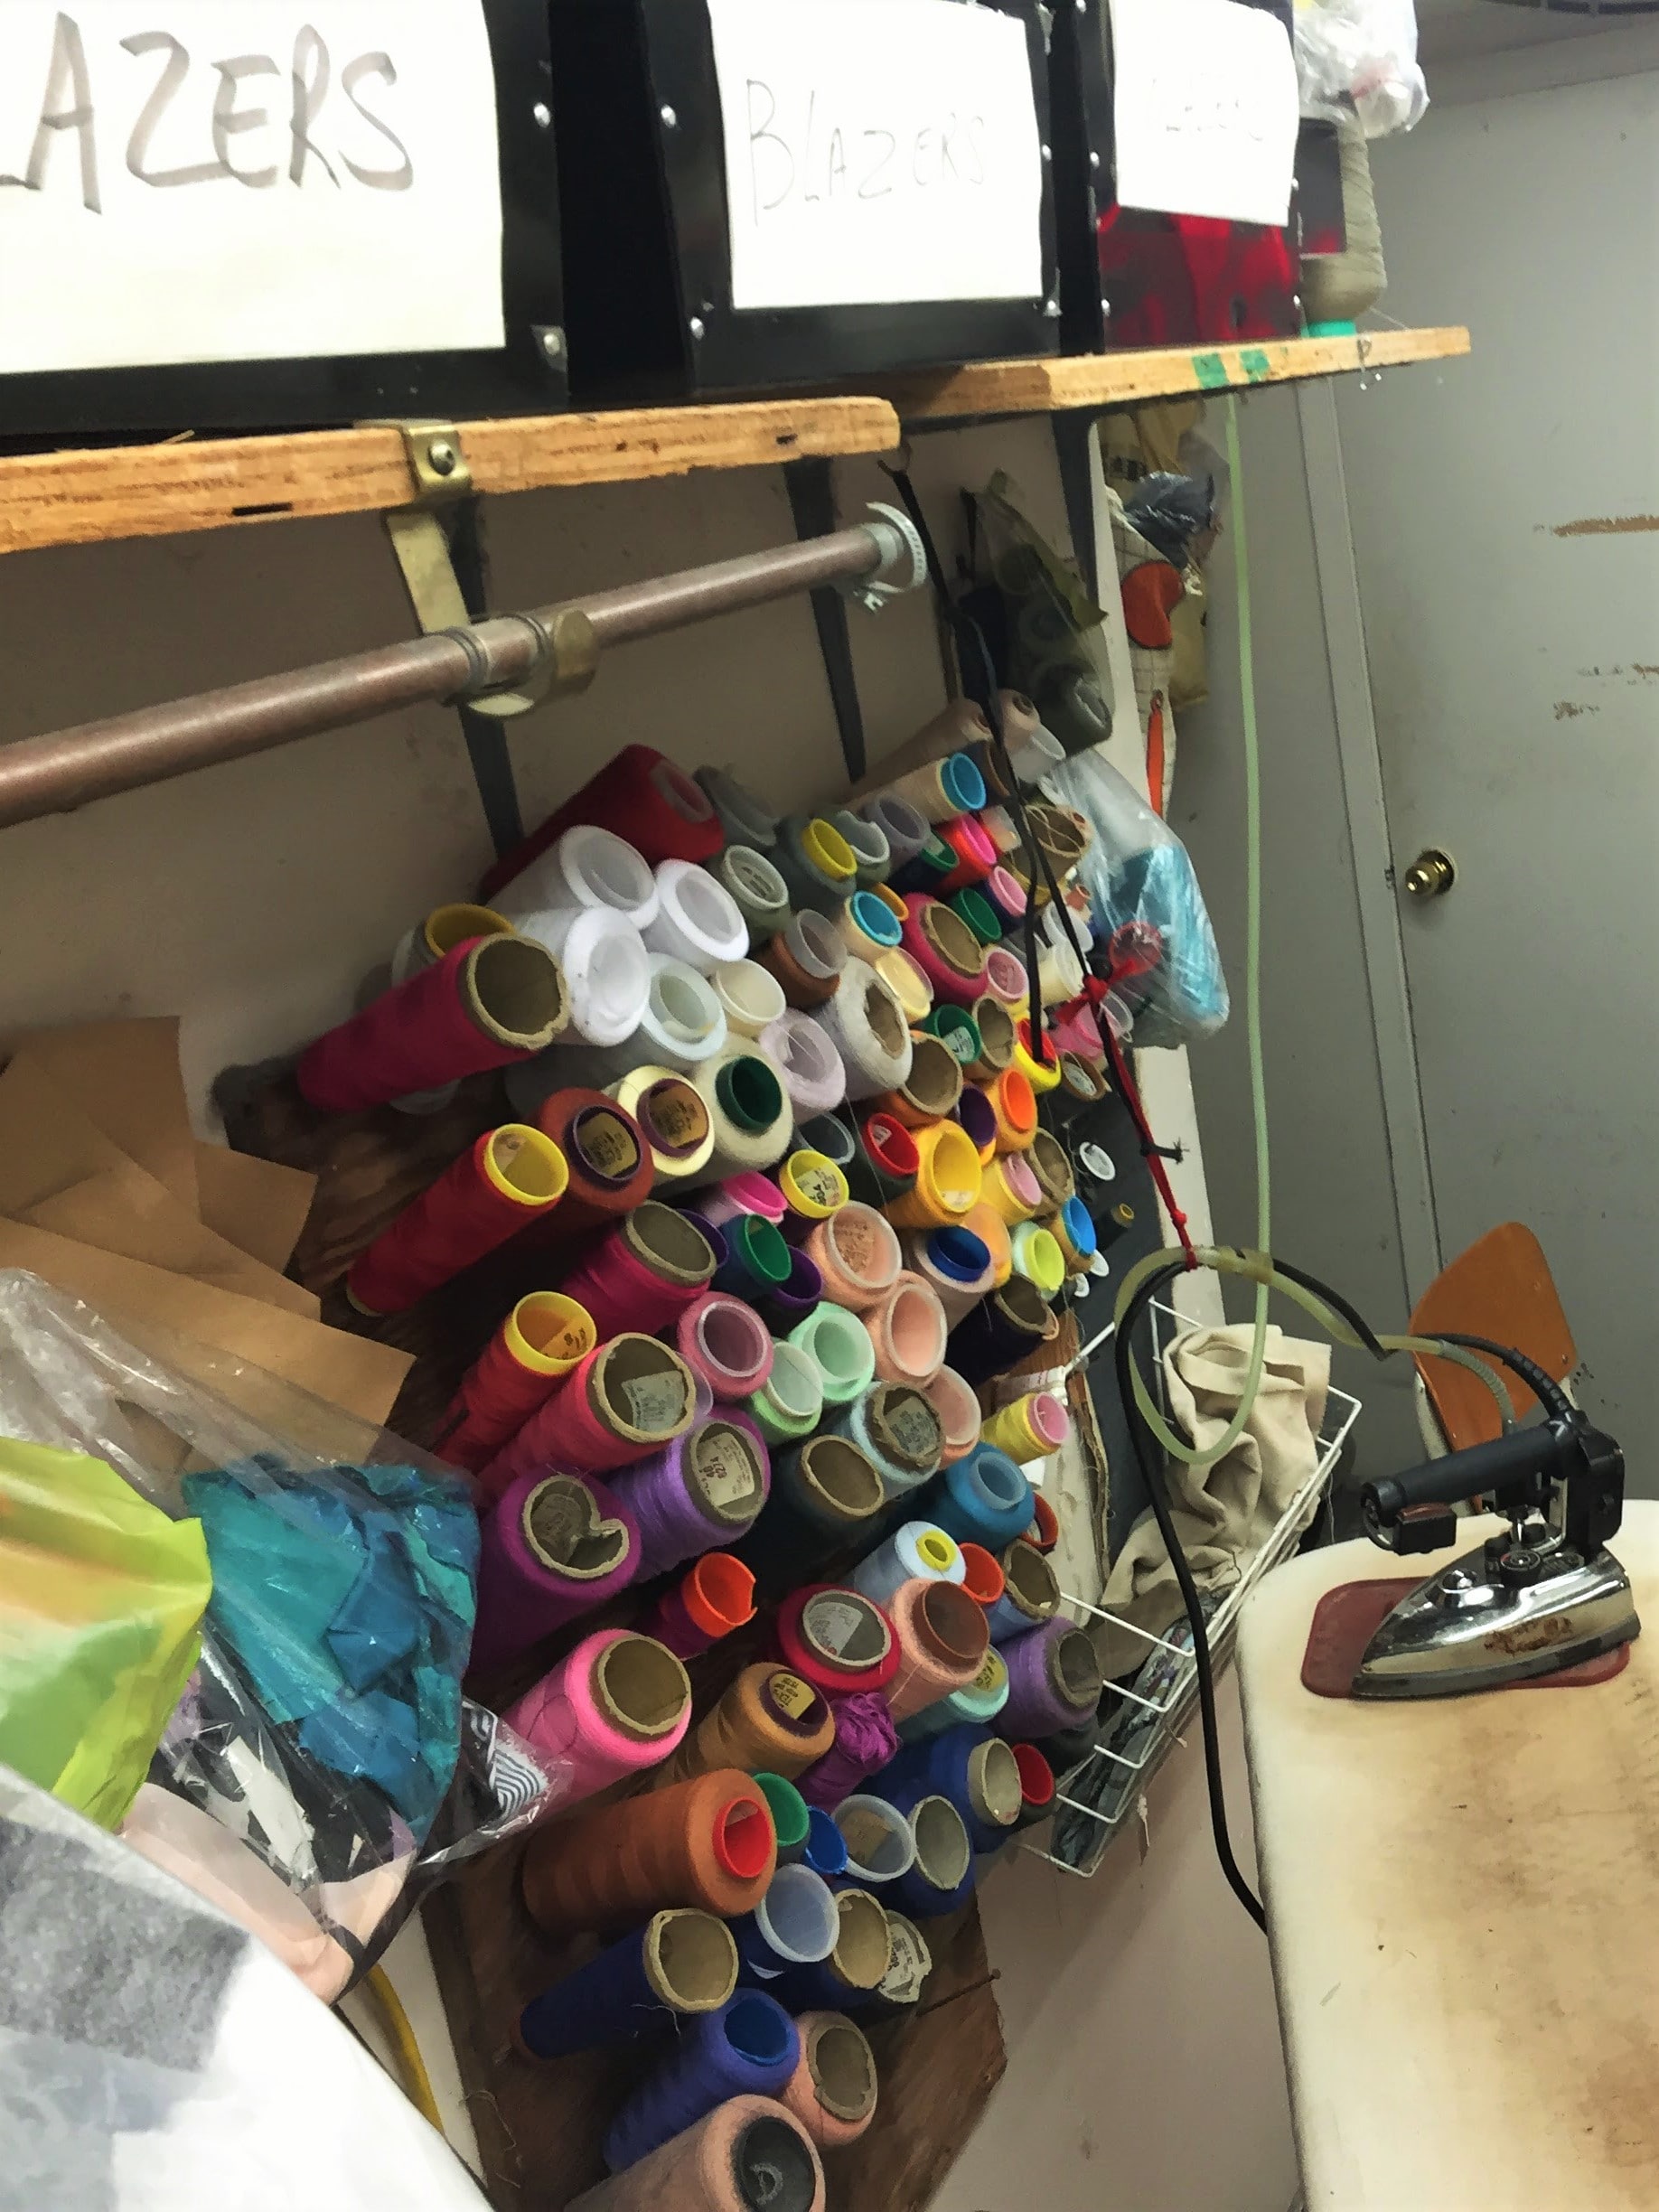 Photo of Spools of thread next to the ironing board